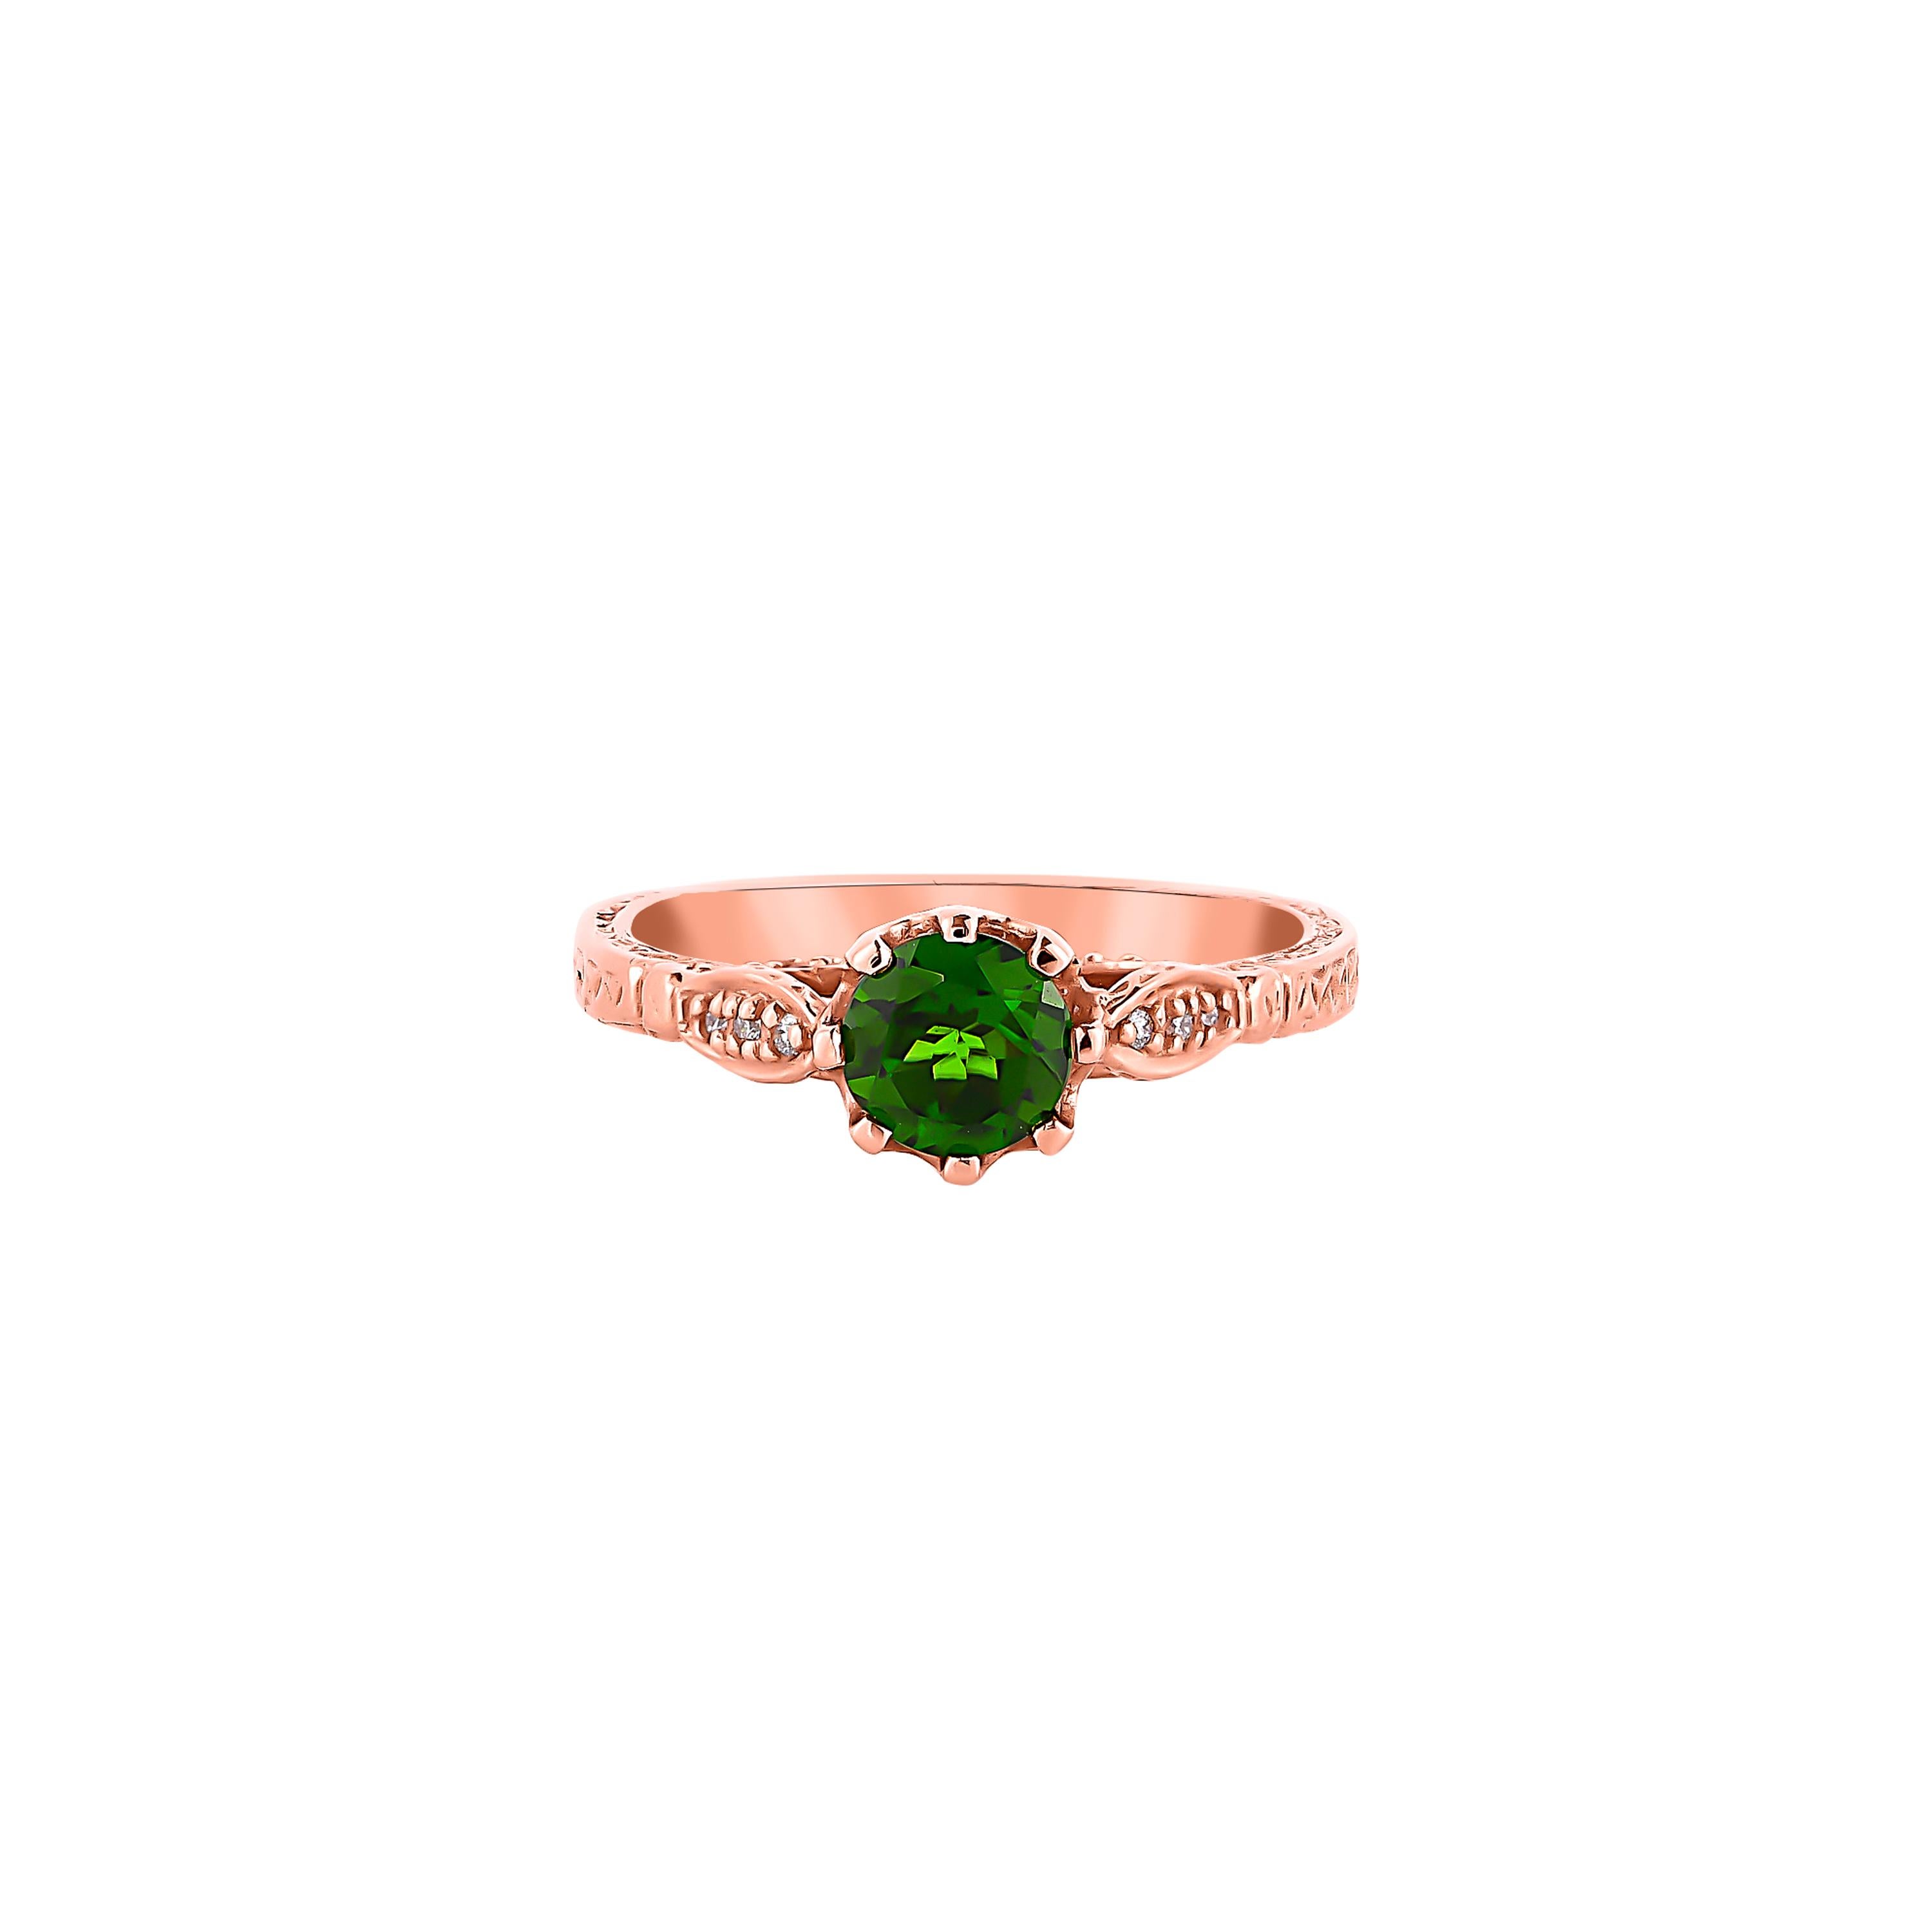 Round Cut 0.95 Carat Chrome Diopside Ring in 14 Karat Rose Gold For Sale